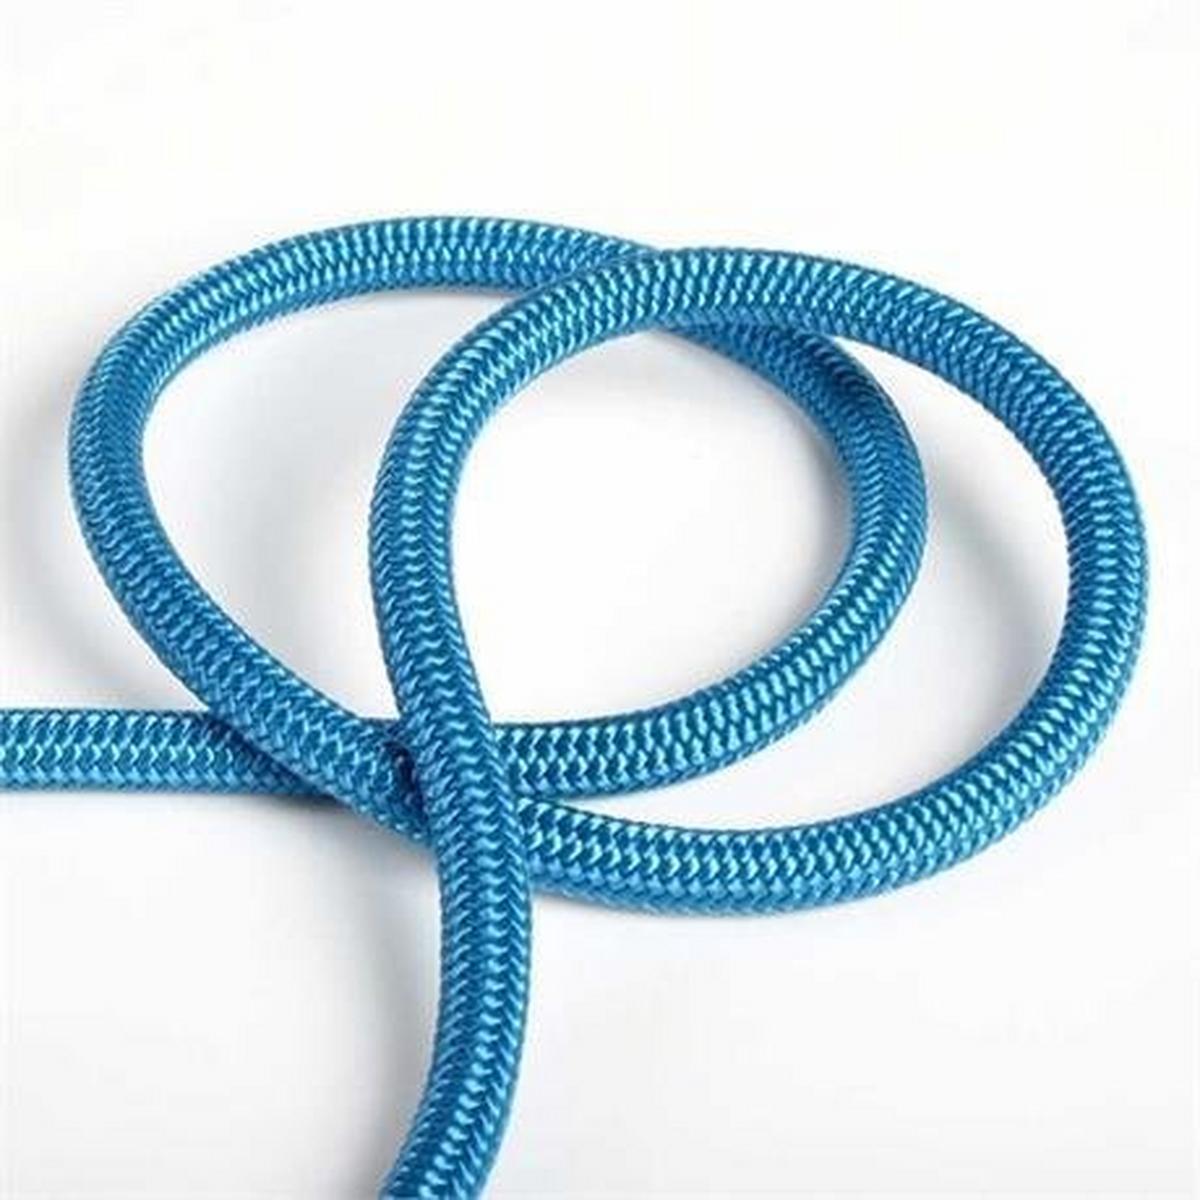 Edelweis s Ropes Accessory Cord 7mm Sky